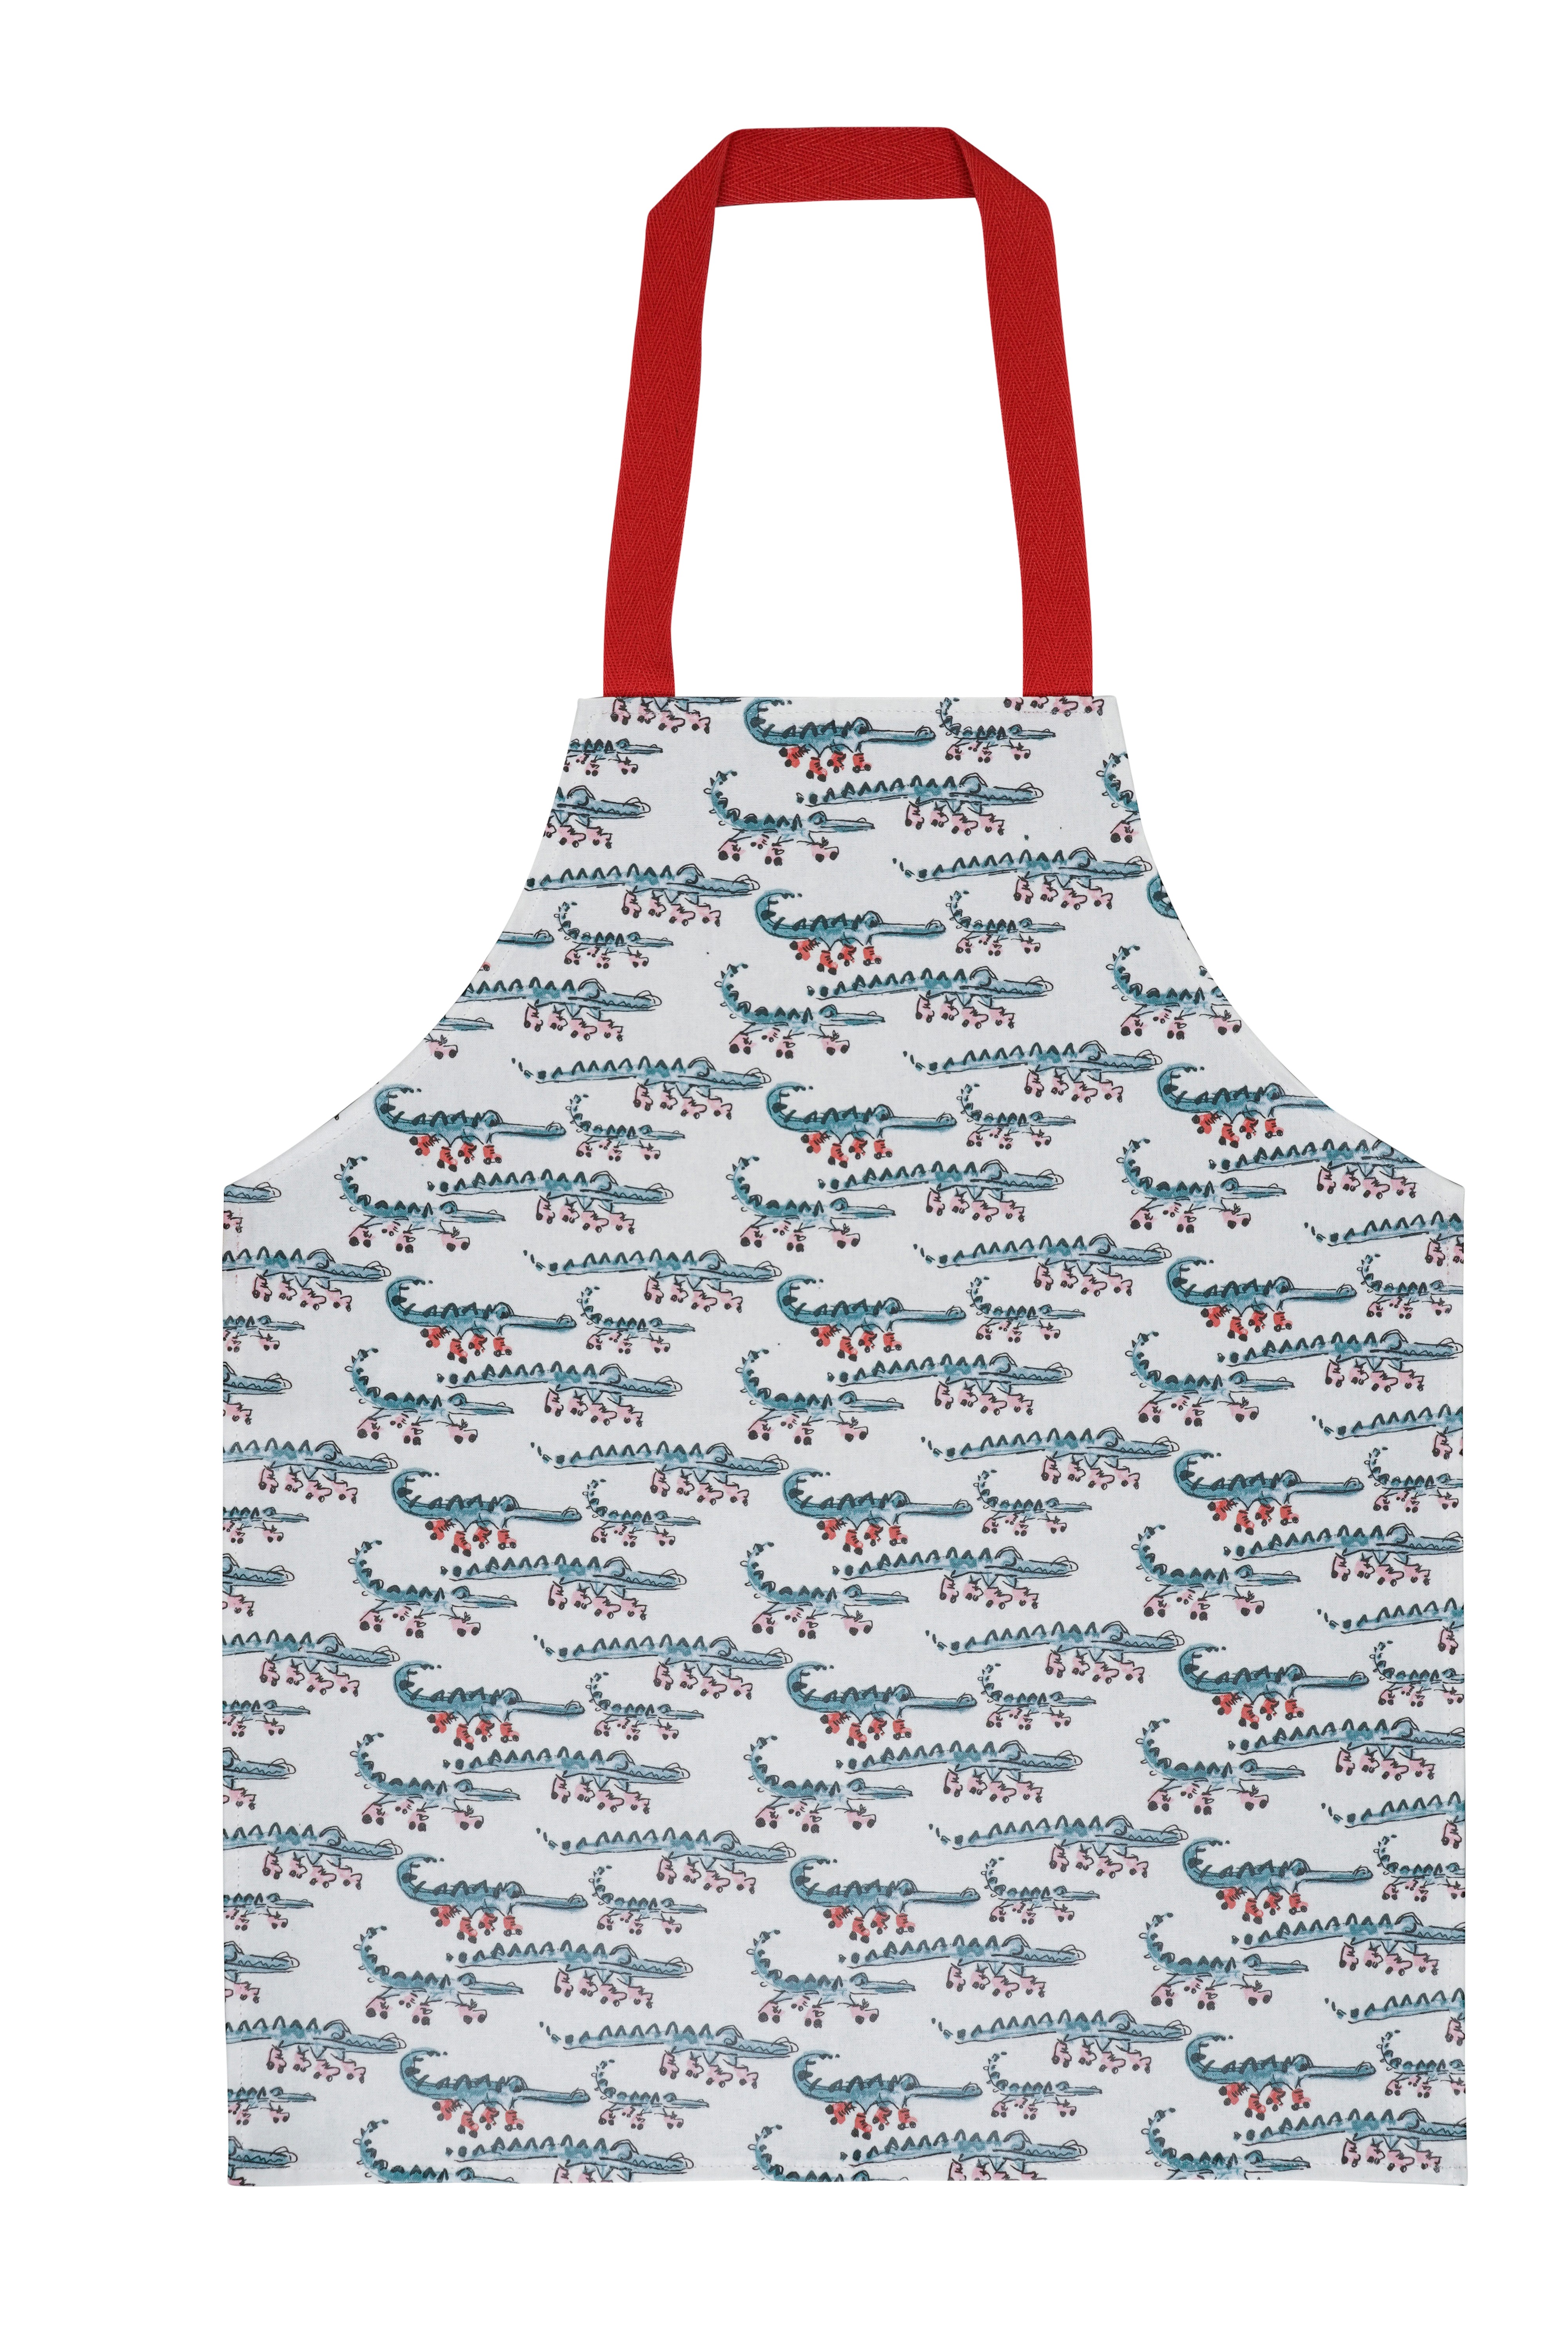 ULSTER WEAVERS KIDS PVC APRONS SEE YOU LATER ALLIGATOR